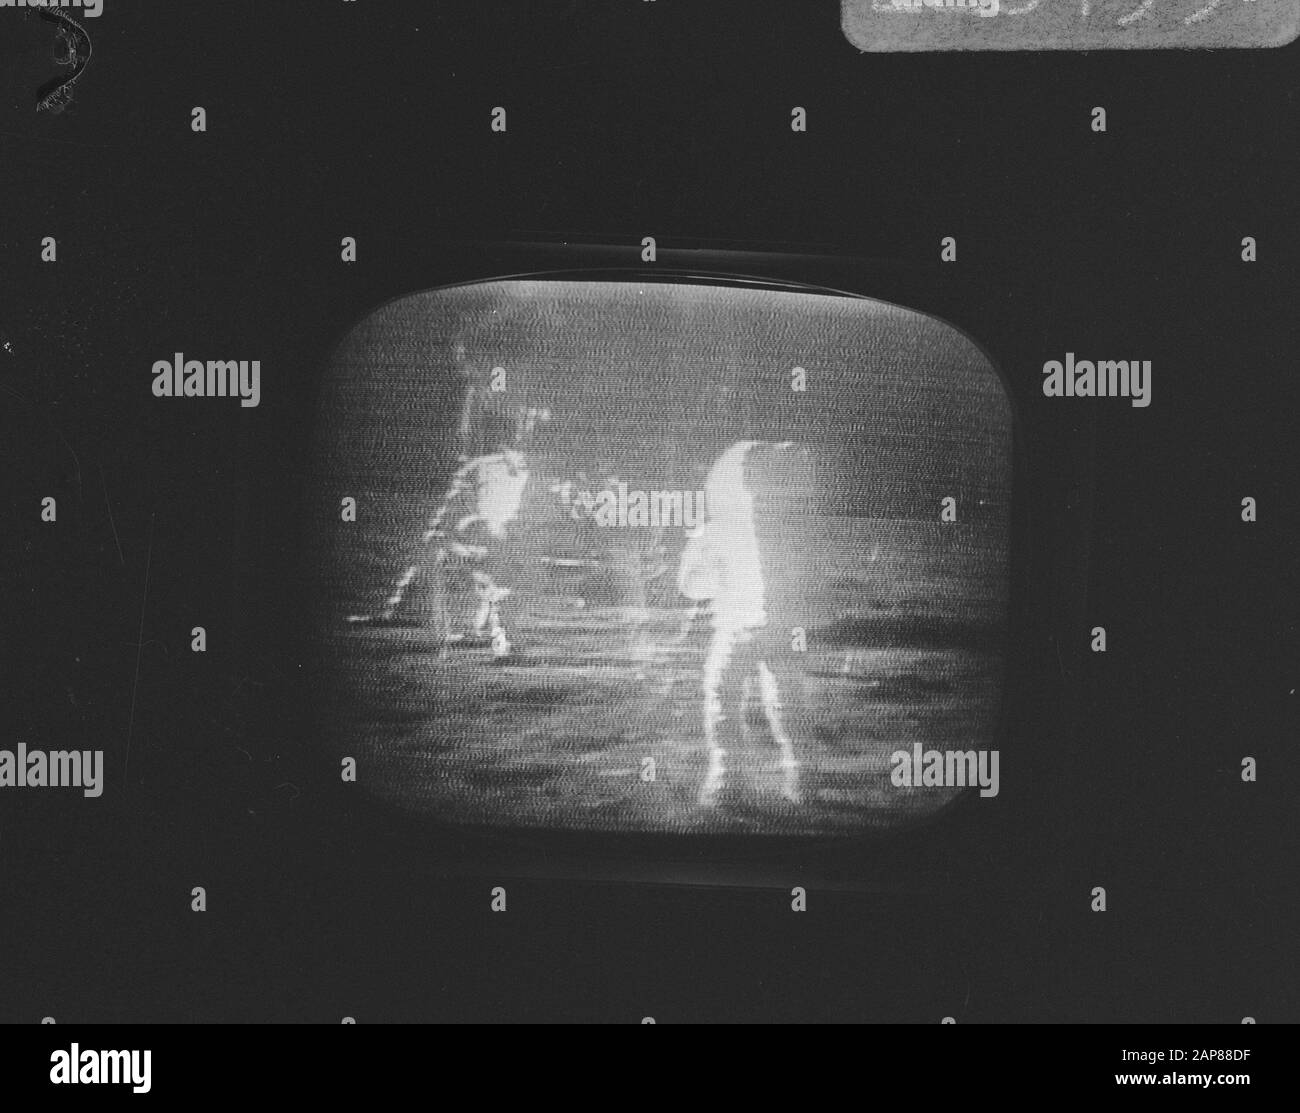 The American astronauts Neil Armstrong and Edwin Buzz Aldrin set foot on the moon; picture of the TV taken Description: Armstrong and Aldrin on the Moon Date: July 21, 1969 Keywords: moon landings, spacers, television Personal name: Aldrin, E.E., Armstrong, N.A. Stock Photo